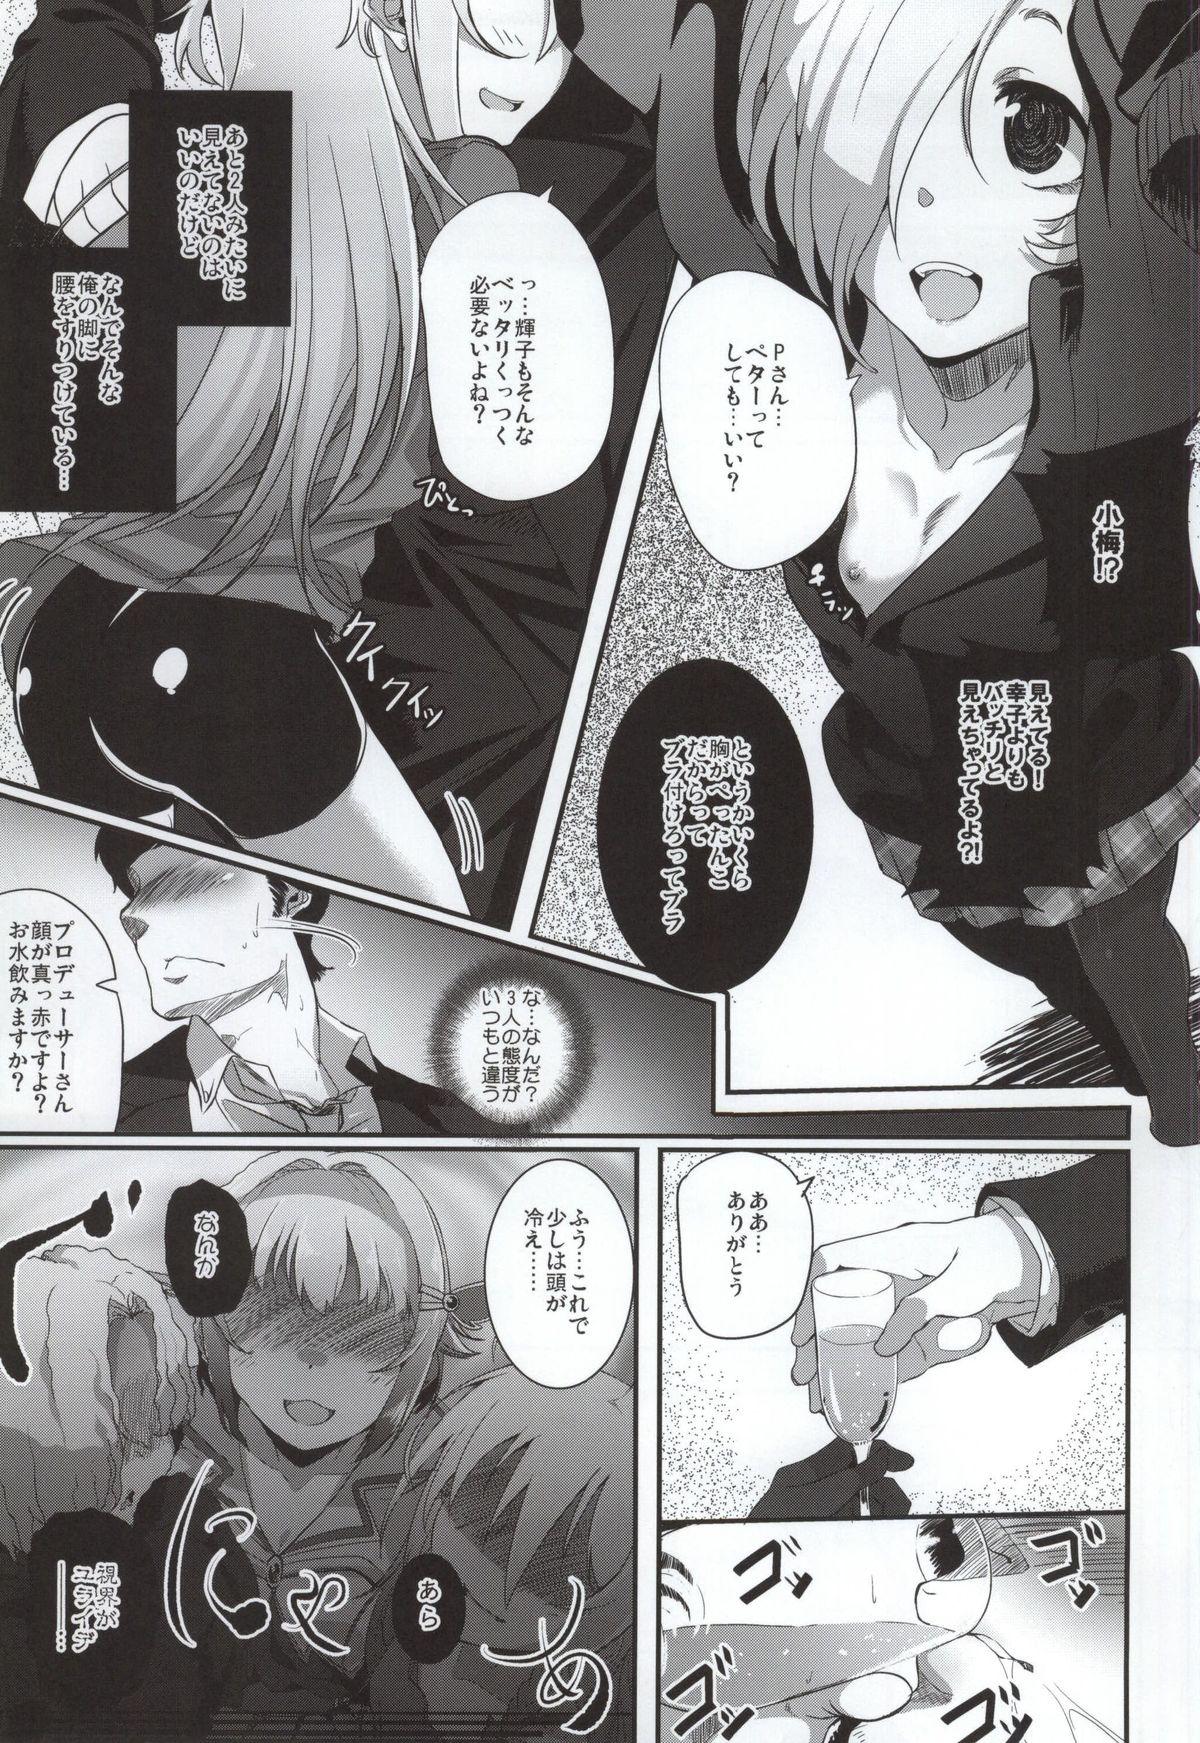 Solo Girl Shall we indulge in Lust, producer? - The idolmaster Gay Largedick - Page 6